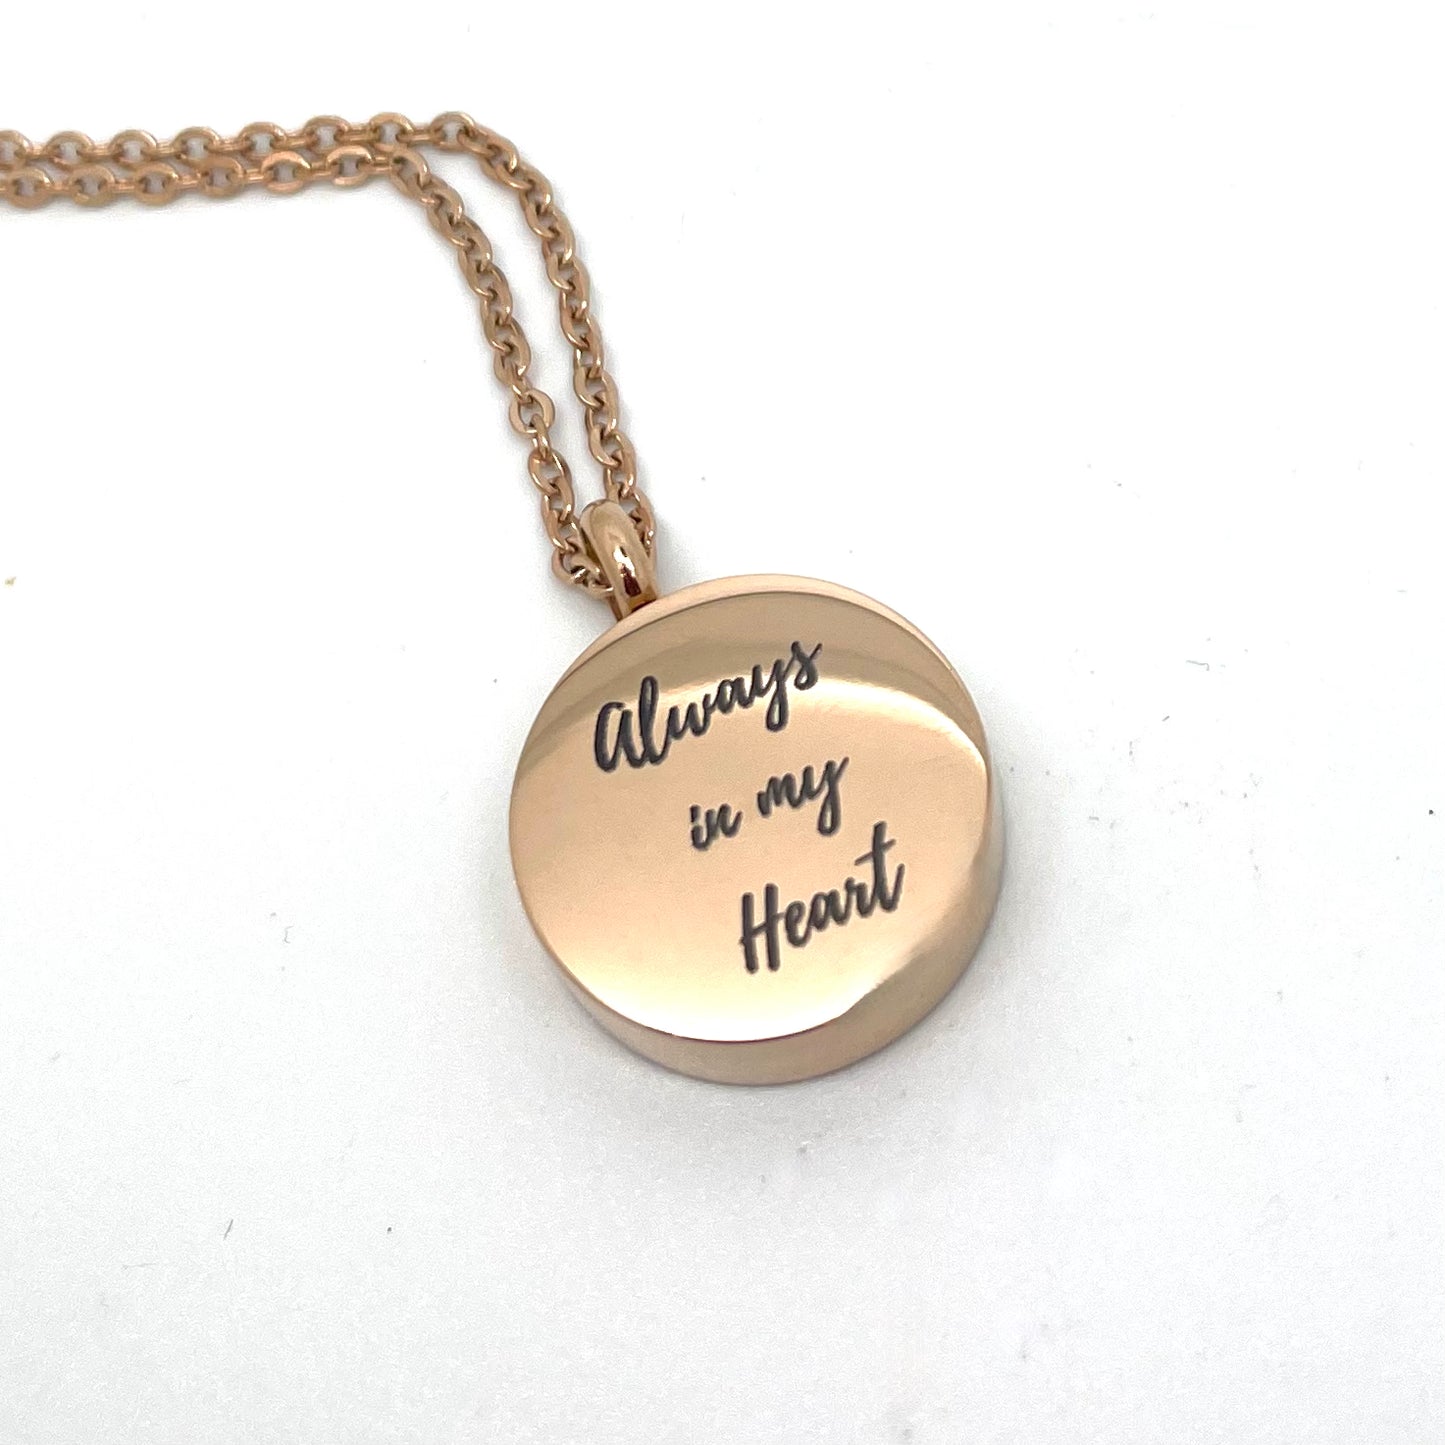 Cremation Urn Pendant - Engraved with actual Paw, Nose or Fingerprint of your cherished Loved One